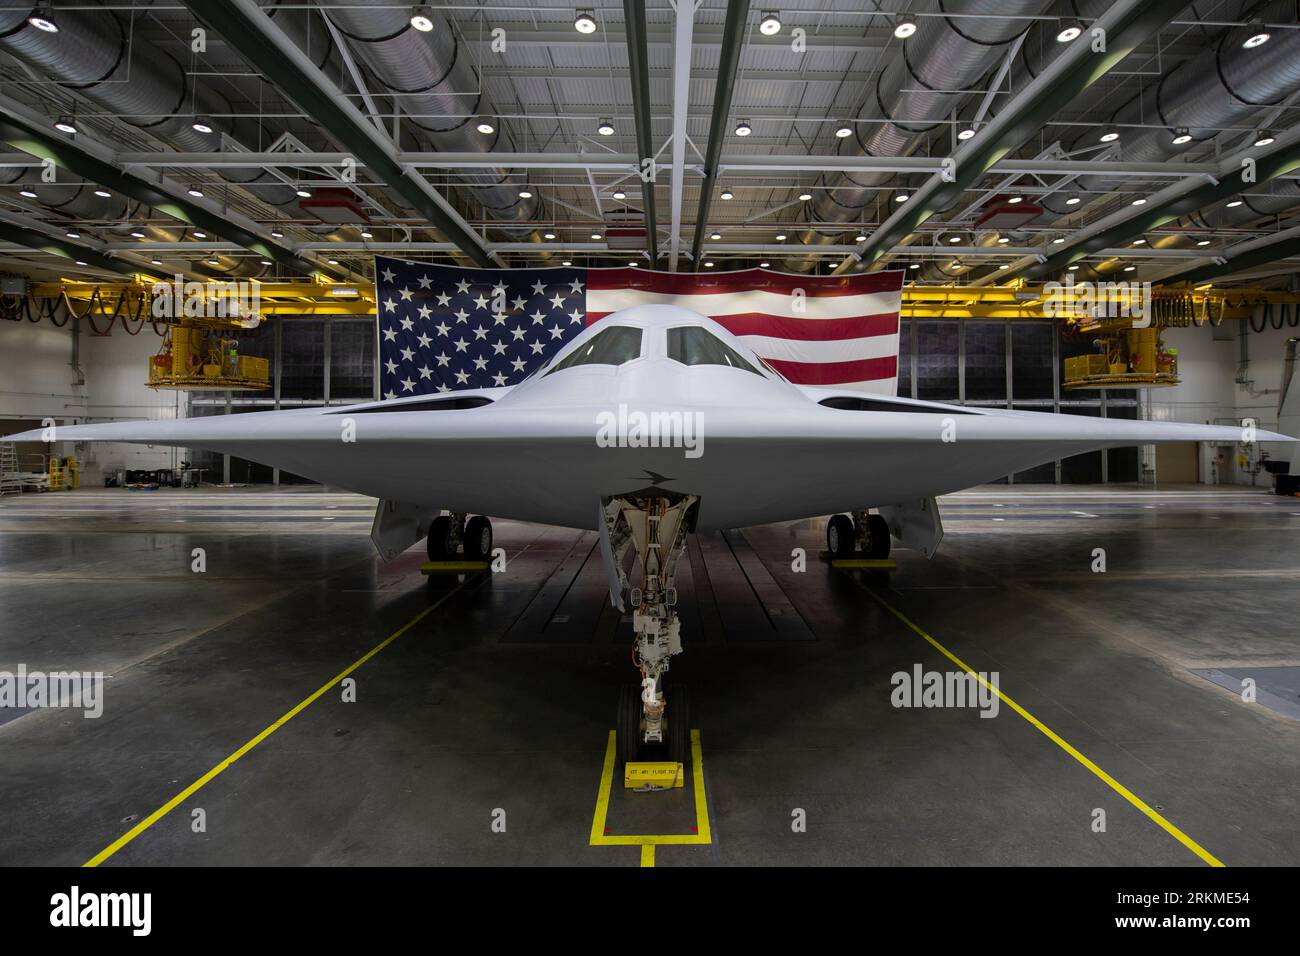 Palmdale, United States. 28 November, 2022. The U.S. Air Force B-21 Raider stealth strategic bomber aircraft in a hangar at Plant 42, before the unveiling ceremony at Edwards Air Force Base, November 28, 2022 in Palmdale, California.  Credit: USAF/U.S. Air Force Photo/Alamy Live News Stock Photo